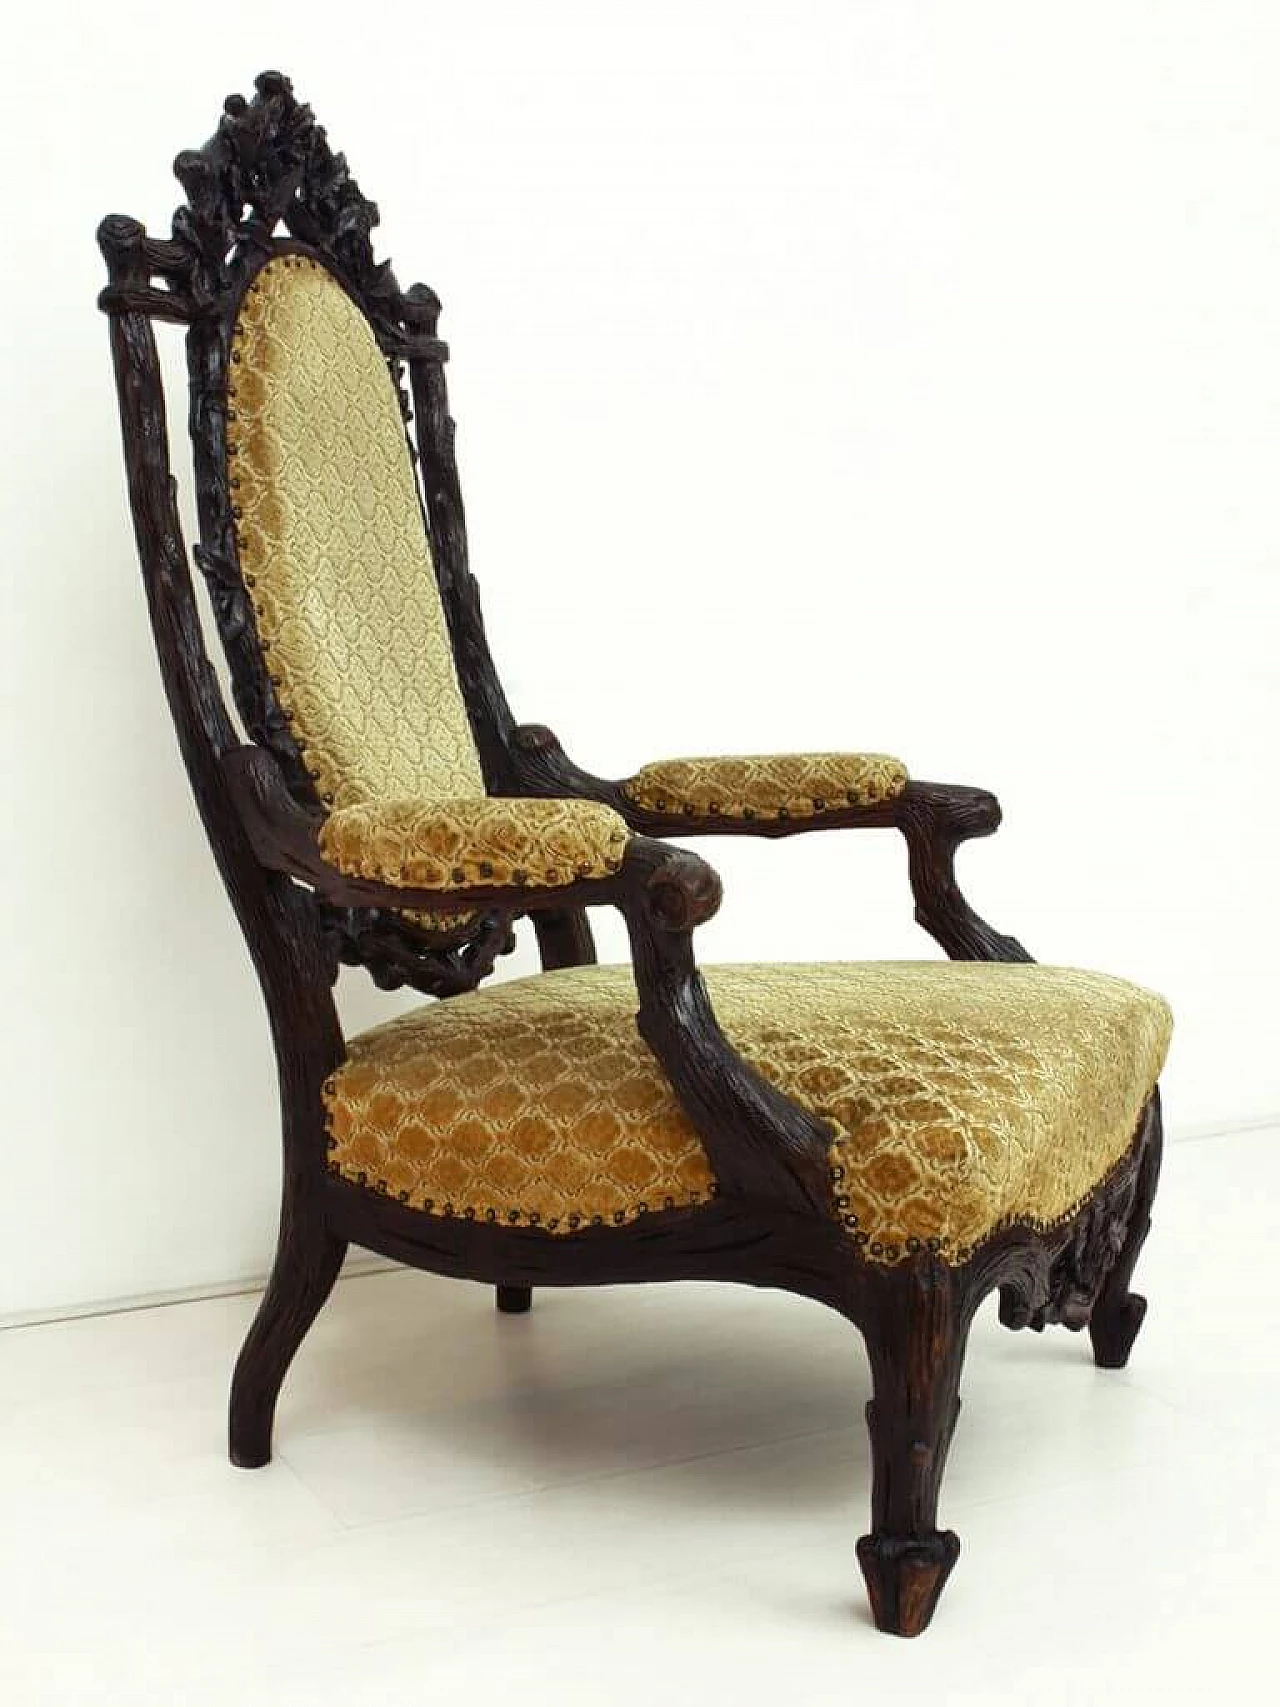 Dutch Black Forest style armchair in walnut and velvet by Gebroeders Horrix, 19th century 1236024